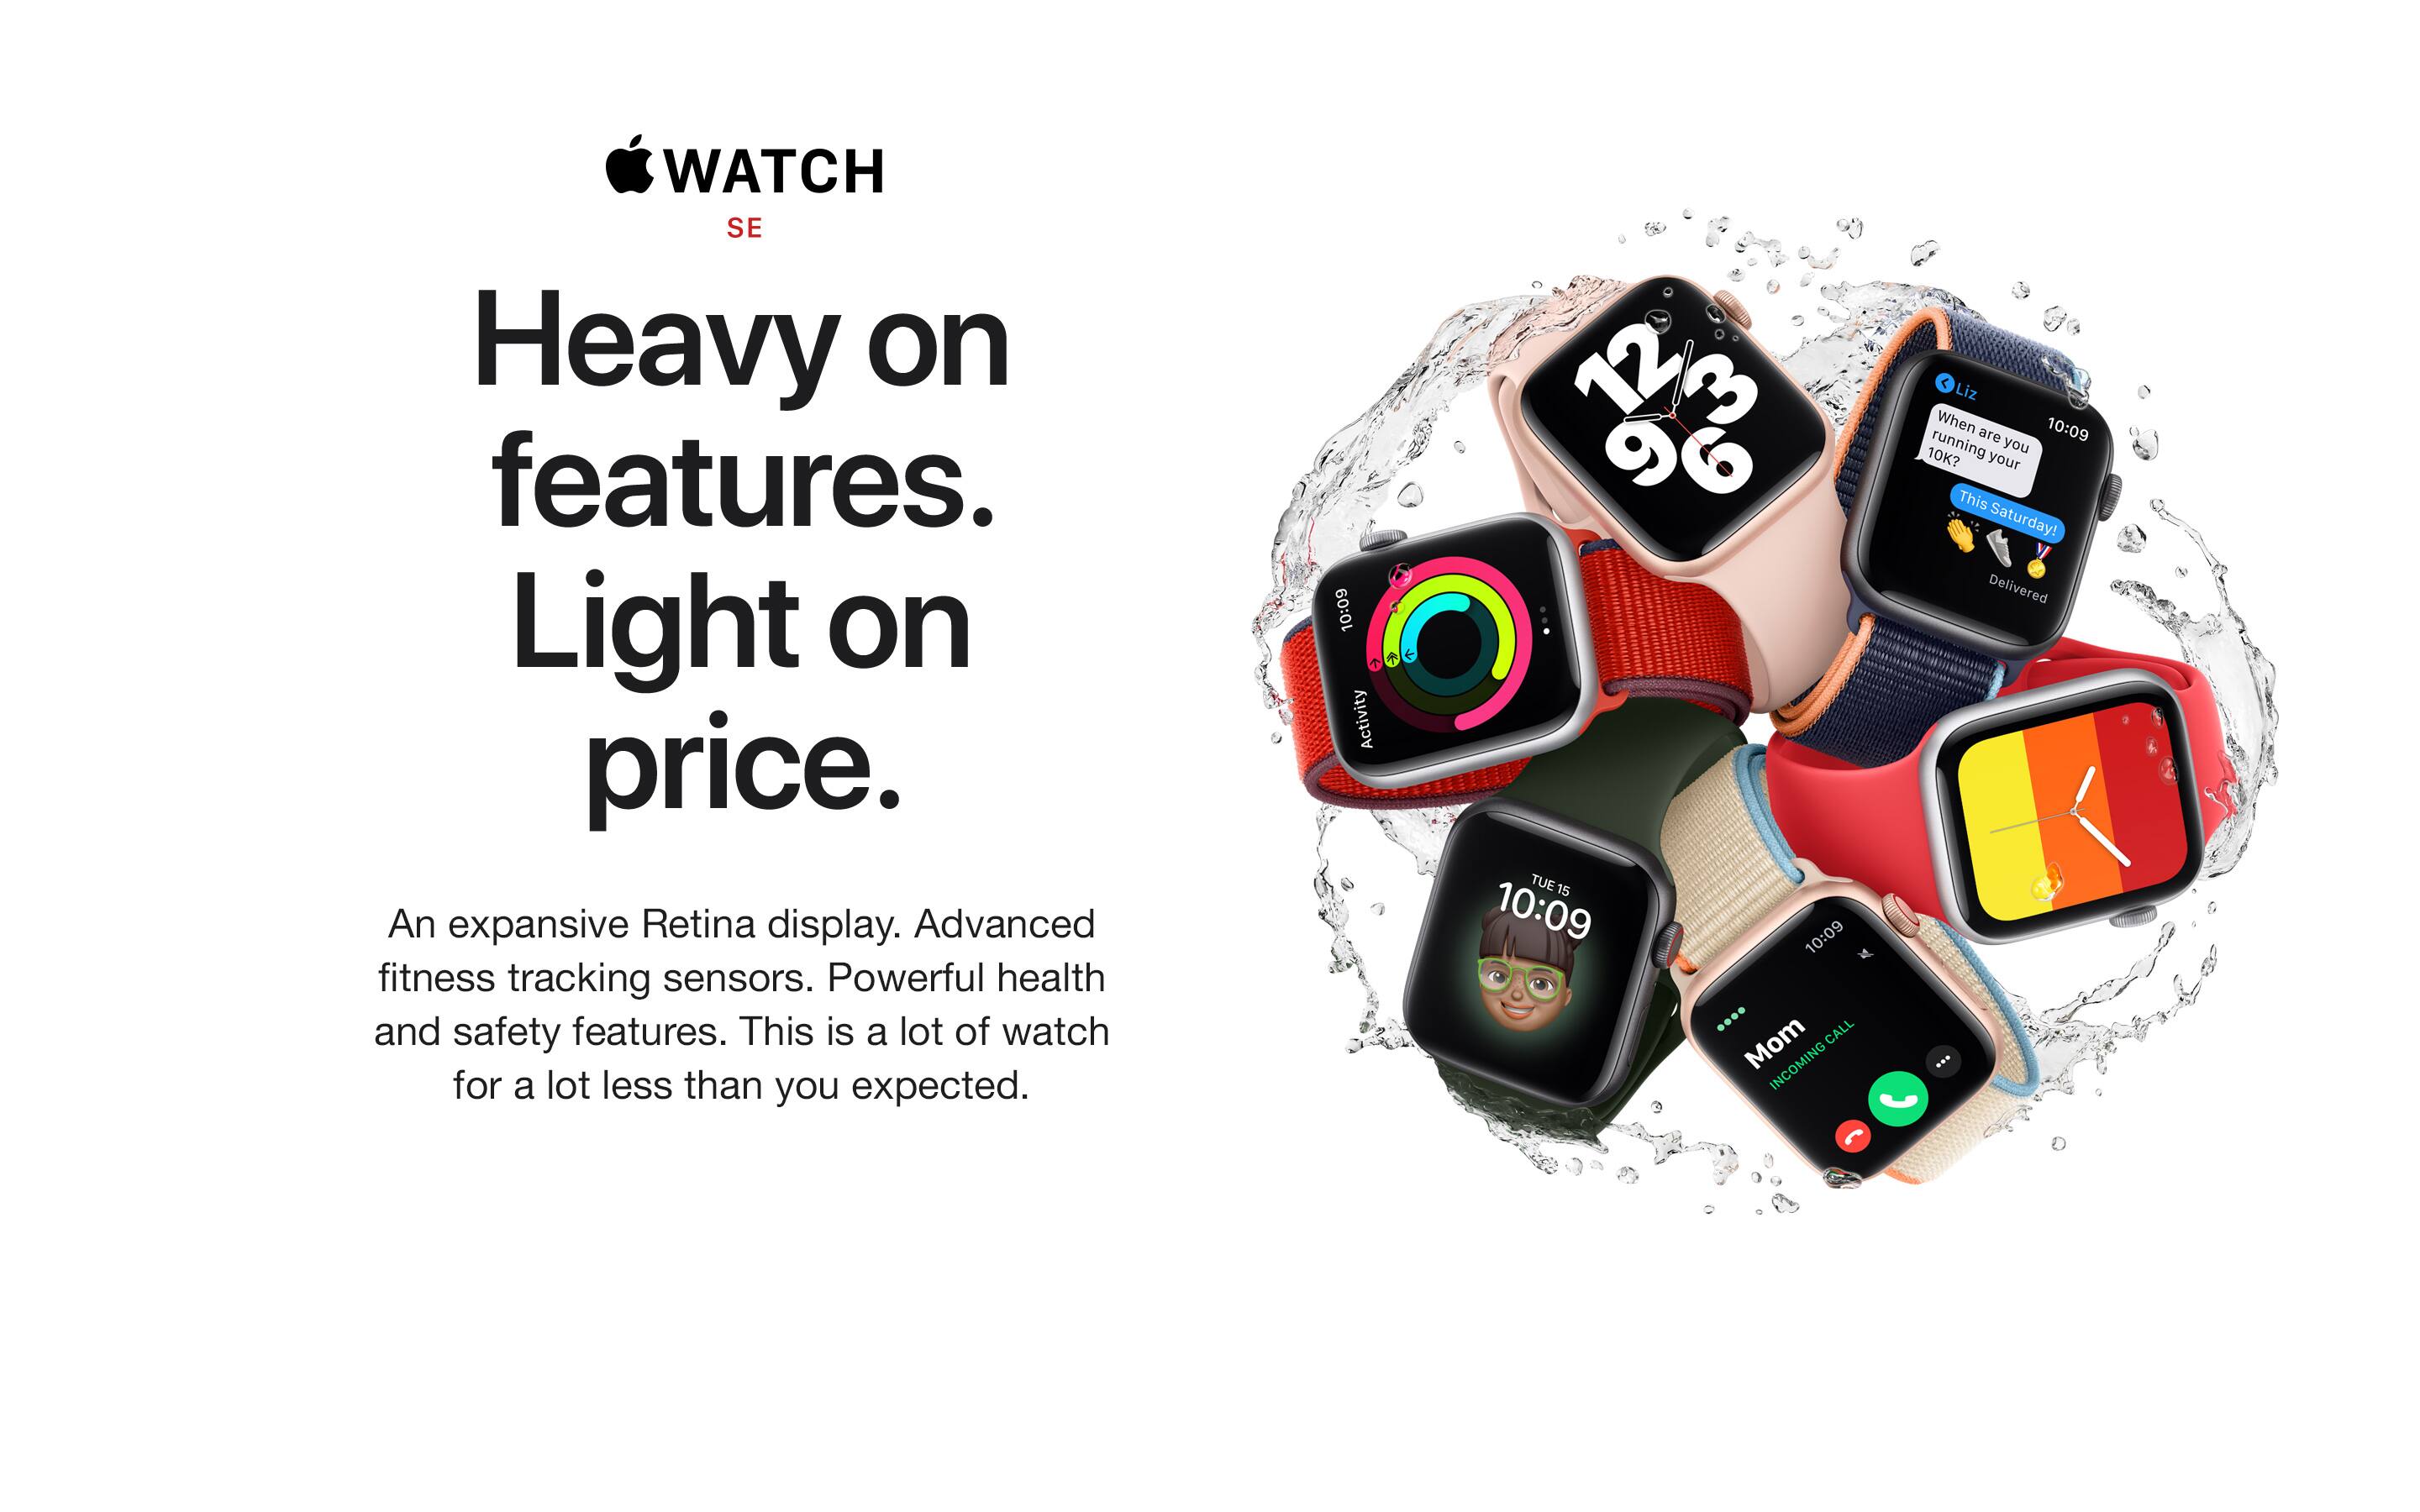 WATCH SE. Heavy on features. Light on price. An expansive Retina display. Advanced fitness tracking sensors. Powerful health and safety features. This is a lot of watch for a lot less than you expected.